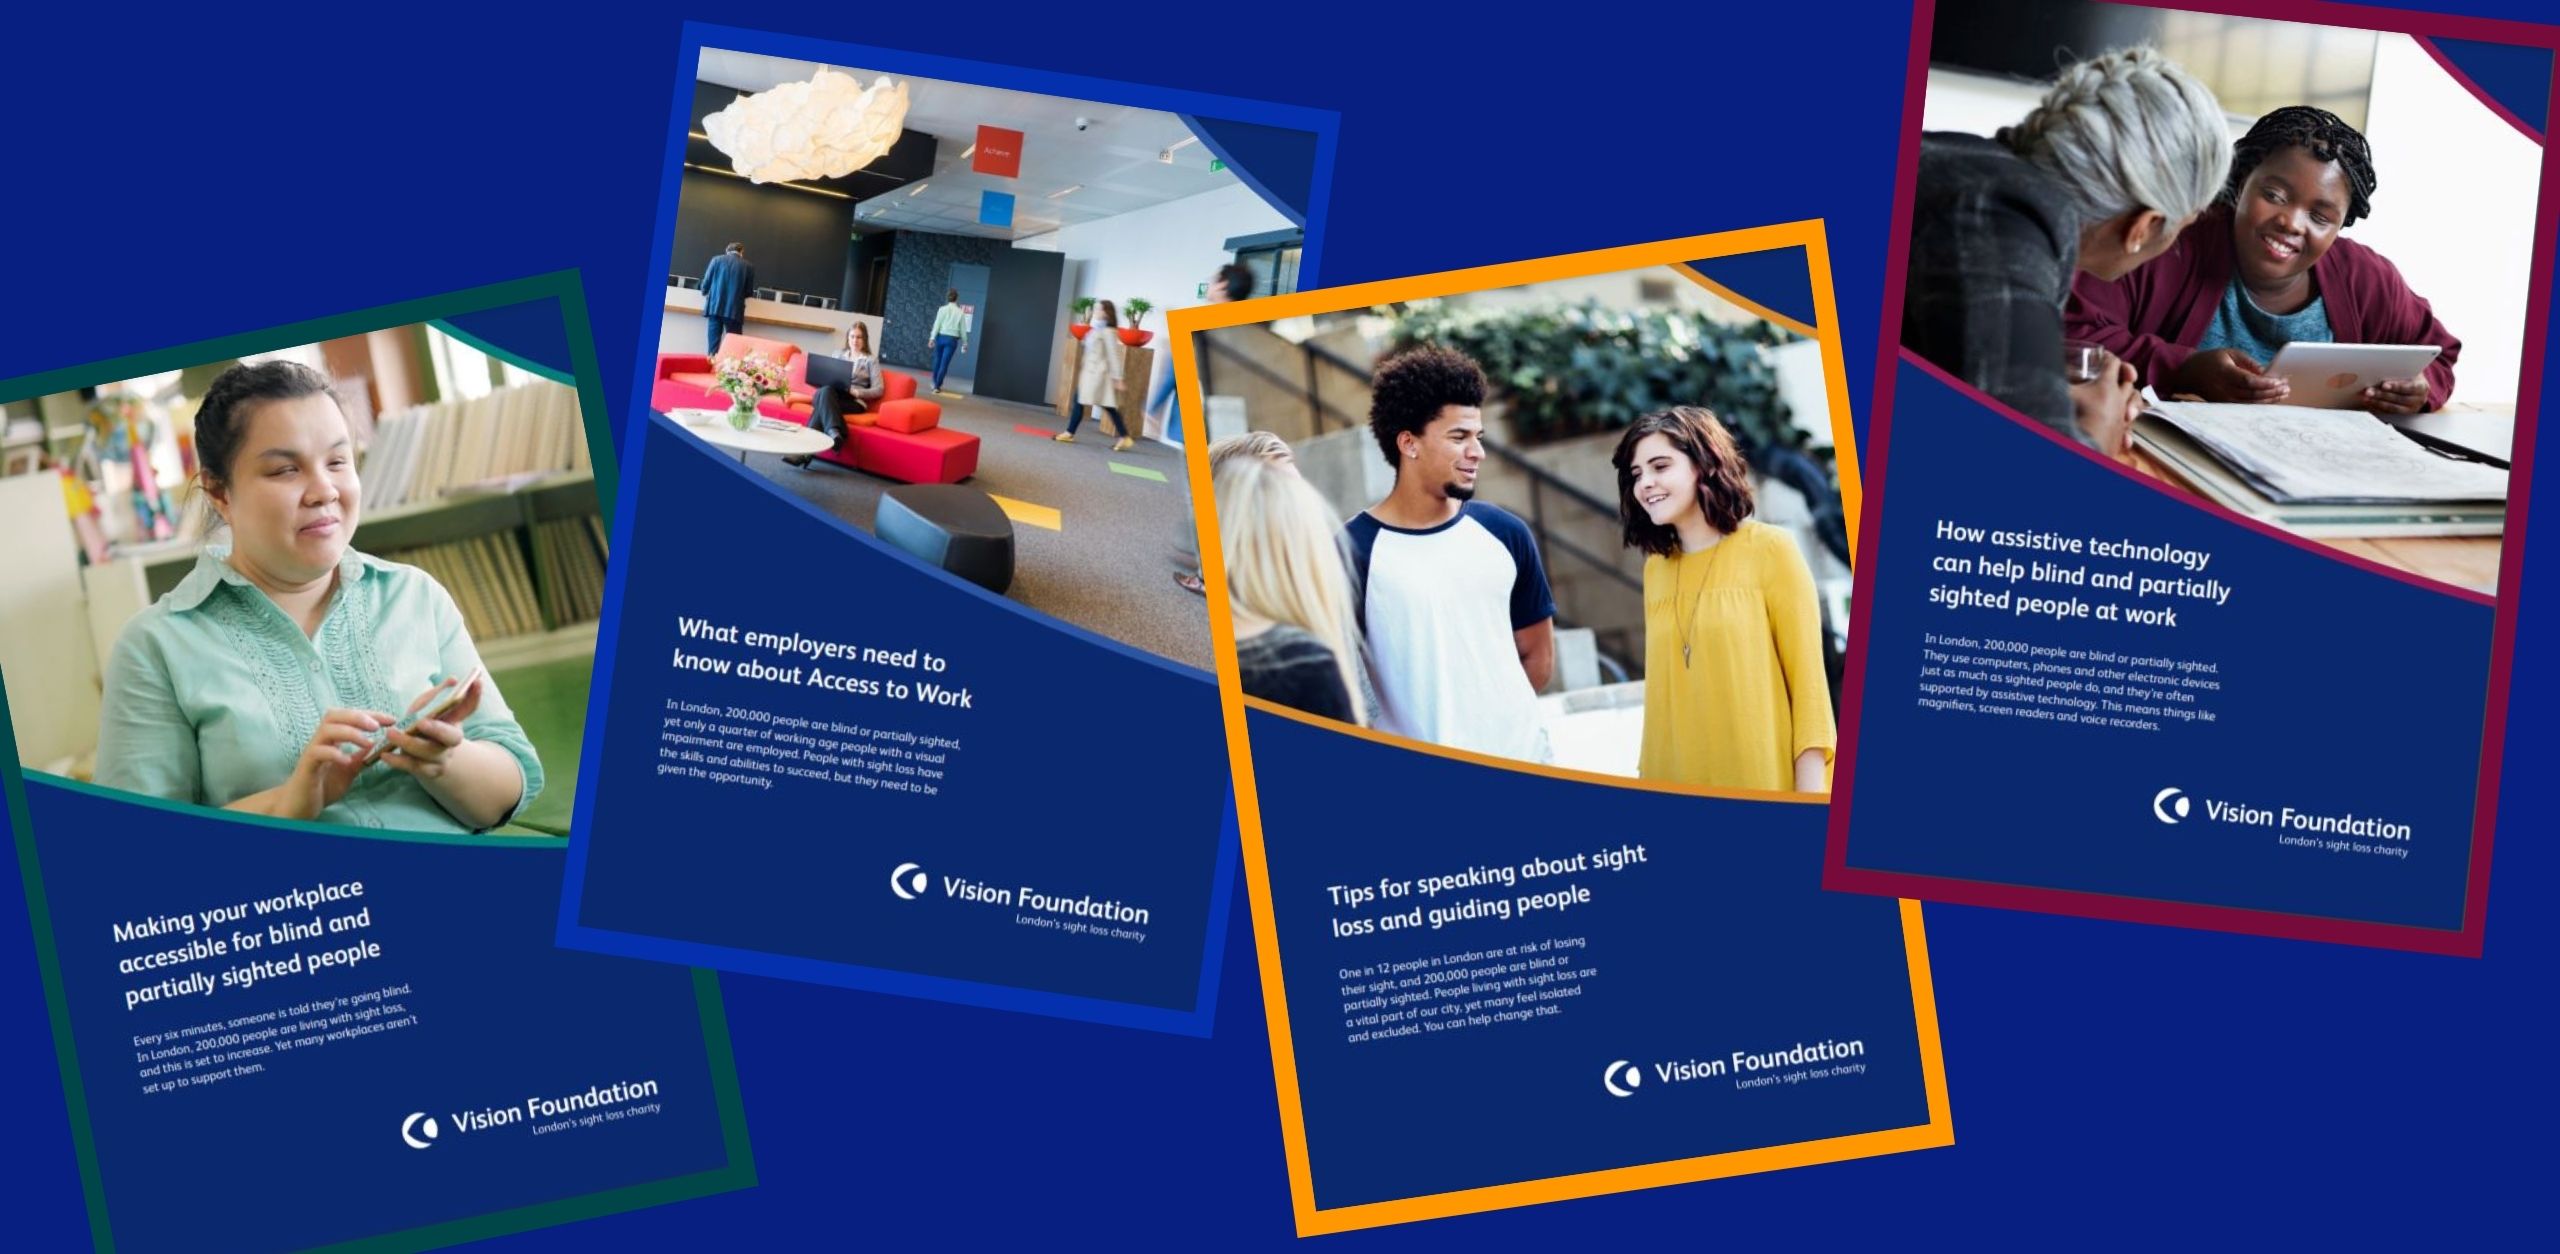 Copies of the Vision Foundation's employer factsheets are arranged on a blue background